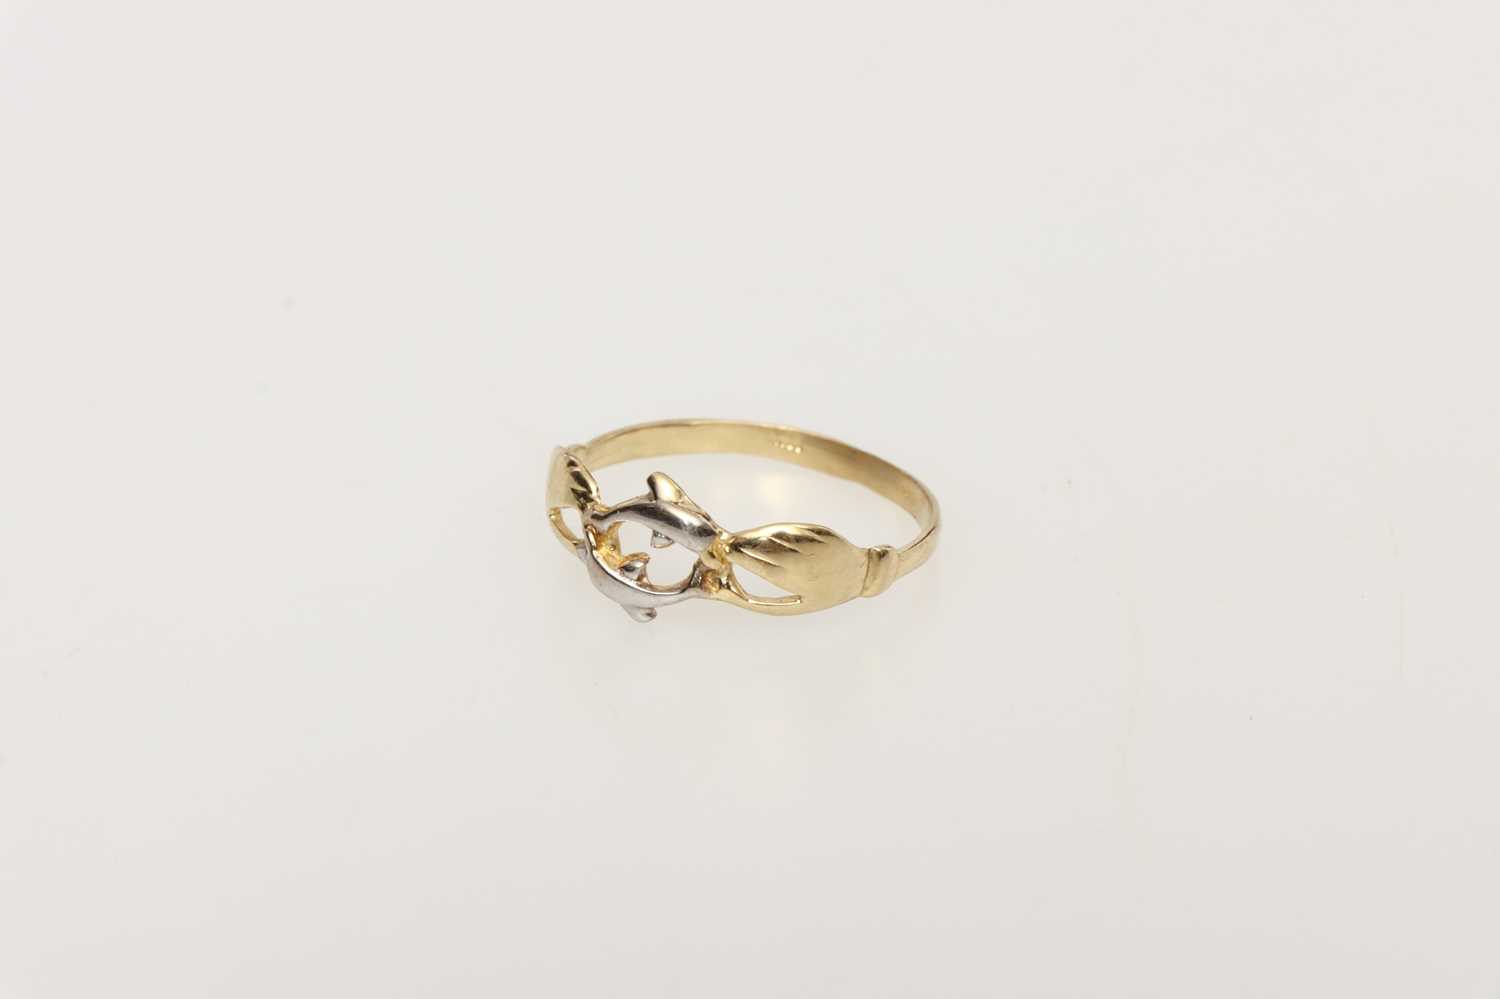 Lot 178 - A Precious Yellow Metal Claddagh Style Dolphin Ring